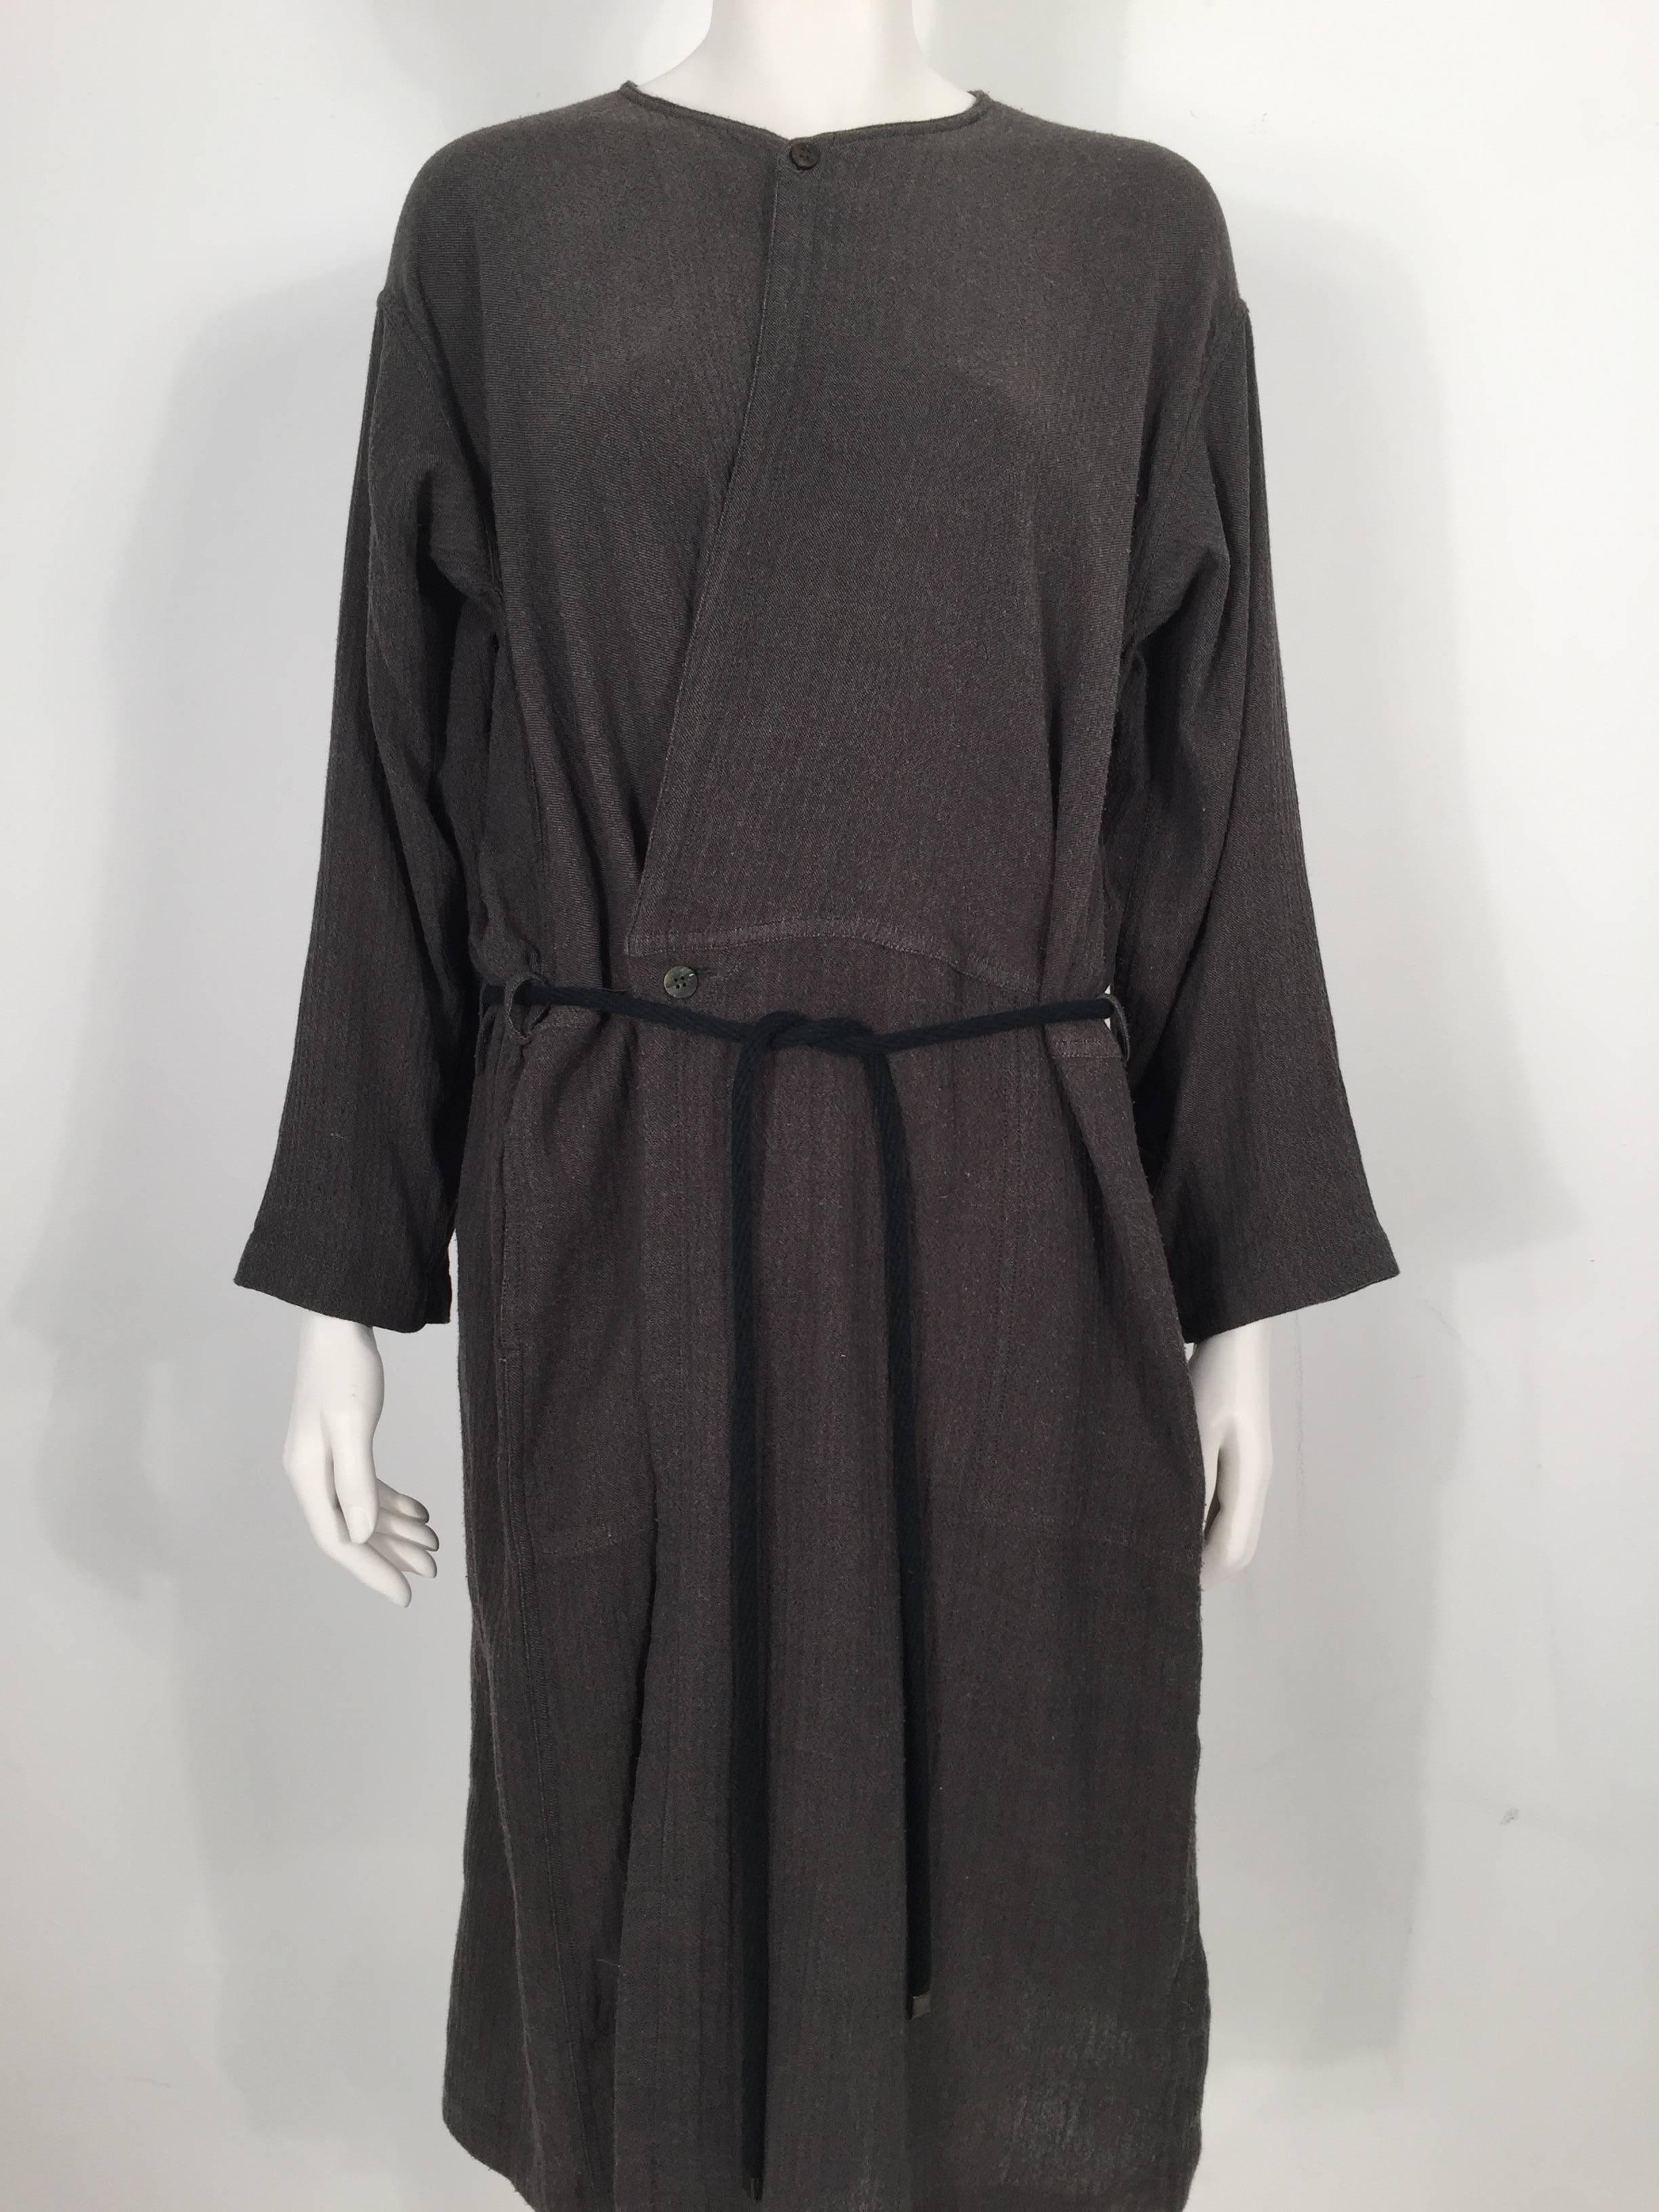 Issey Miyake Plantation 1980's dress is 100% Cotton and features an adjustable belt.

Measurements: Sleeves: 21''; Button Closure: 15''

For International orders, please contact us for a shipping quote.